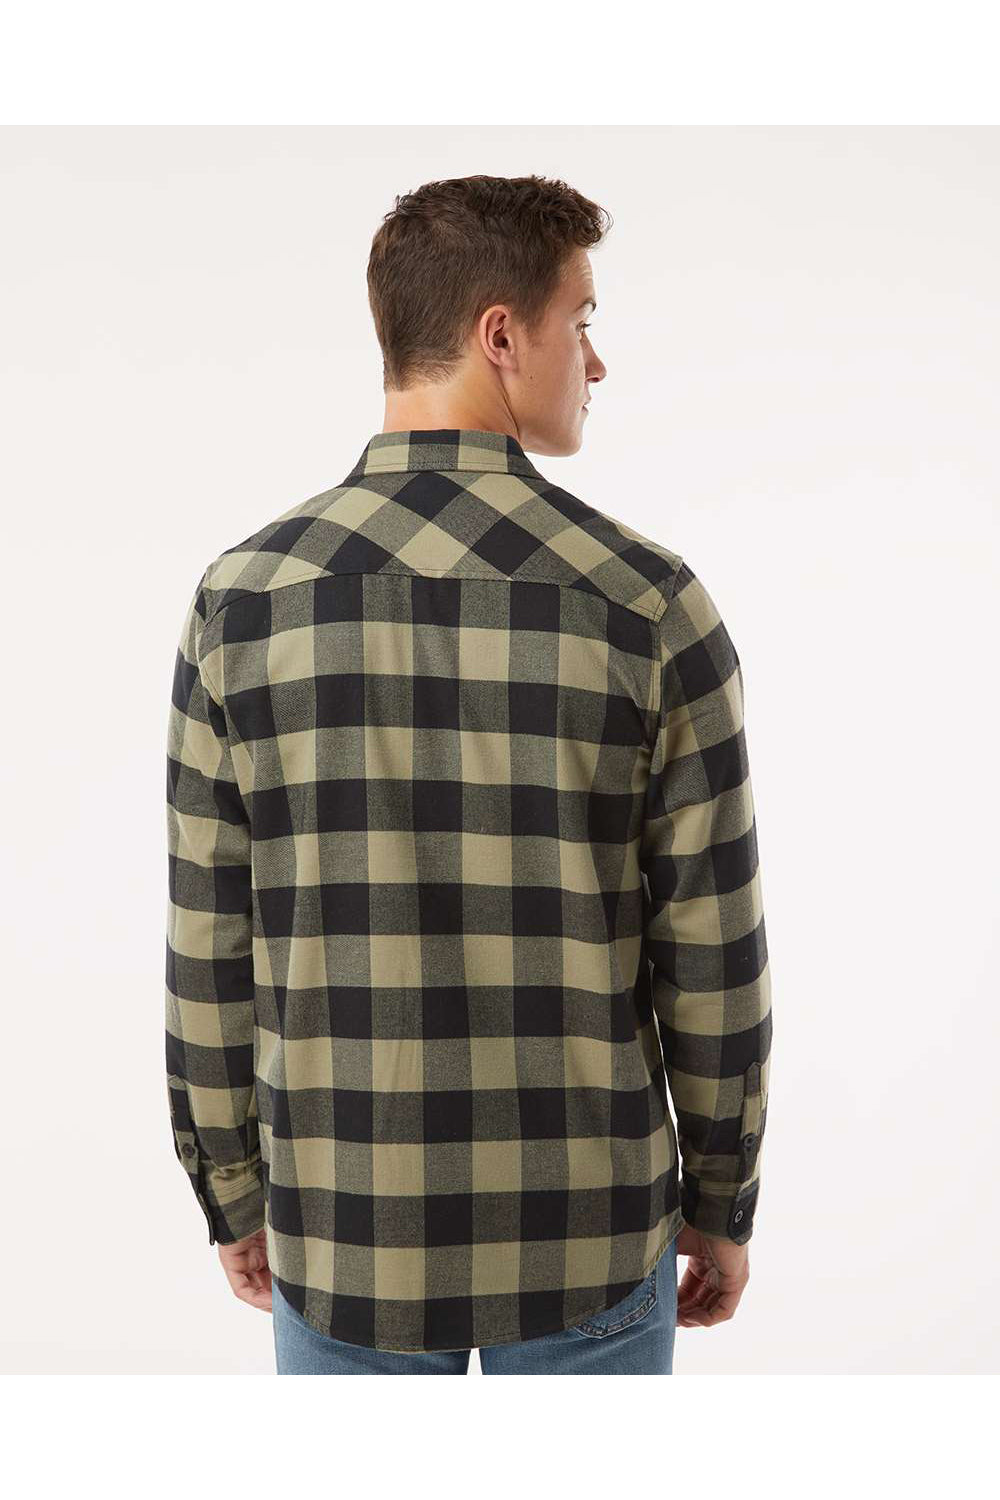 Independent Trading Co. EXP50F Mens Long Sleeve Button Down Flannel Shirt w/ Double Pockets Olive Green/Black Model Back